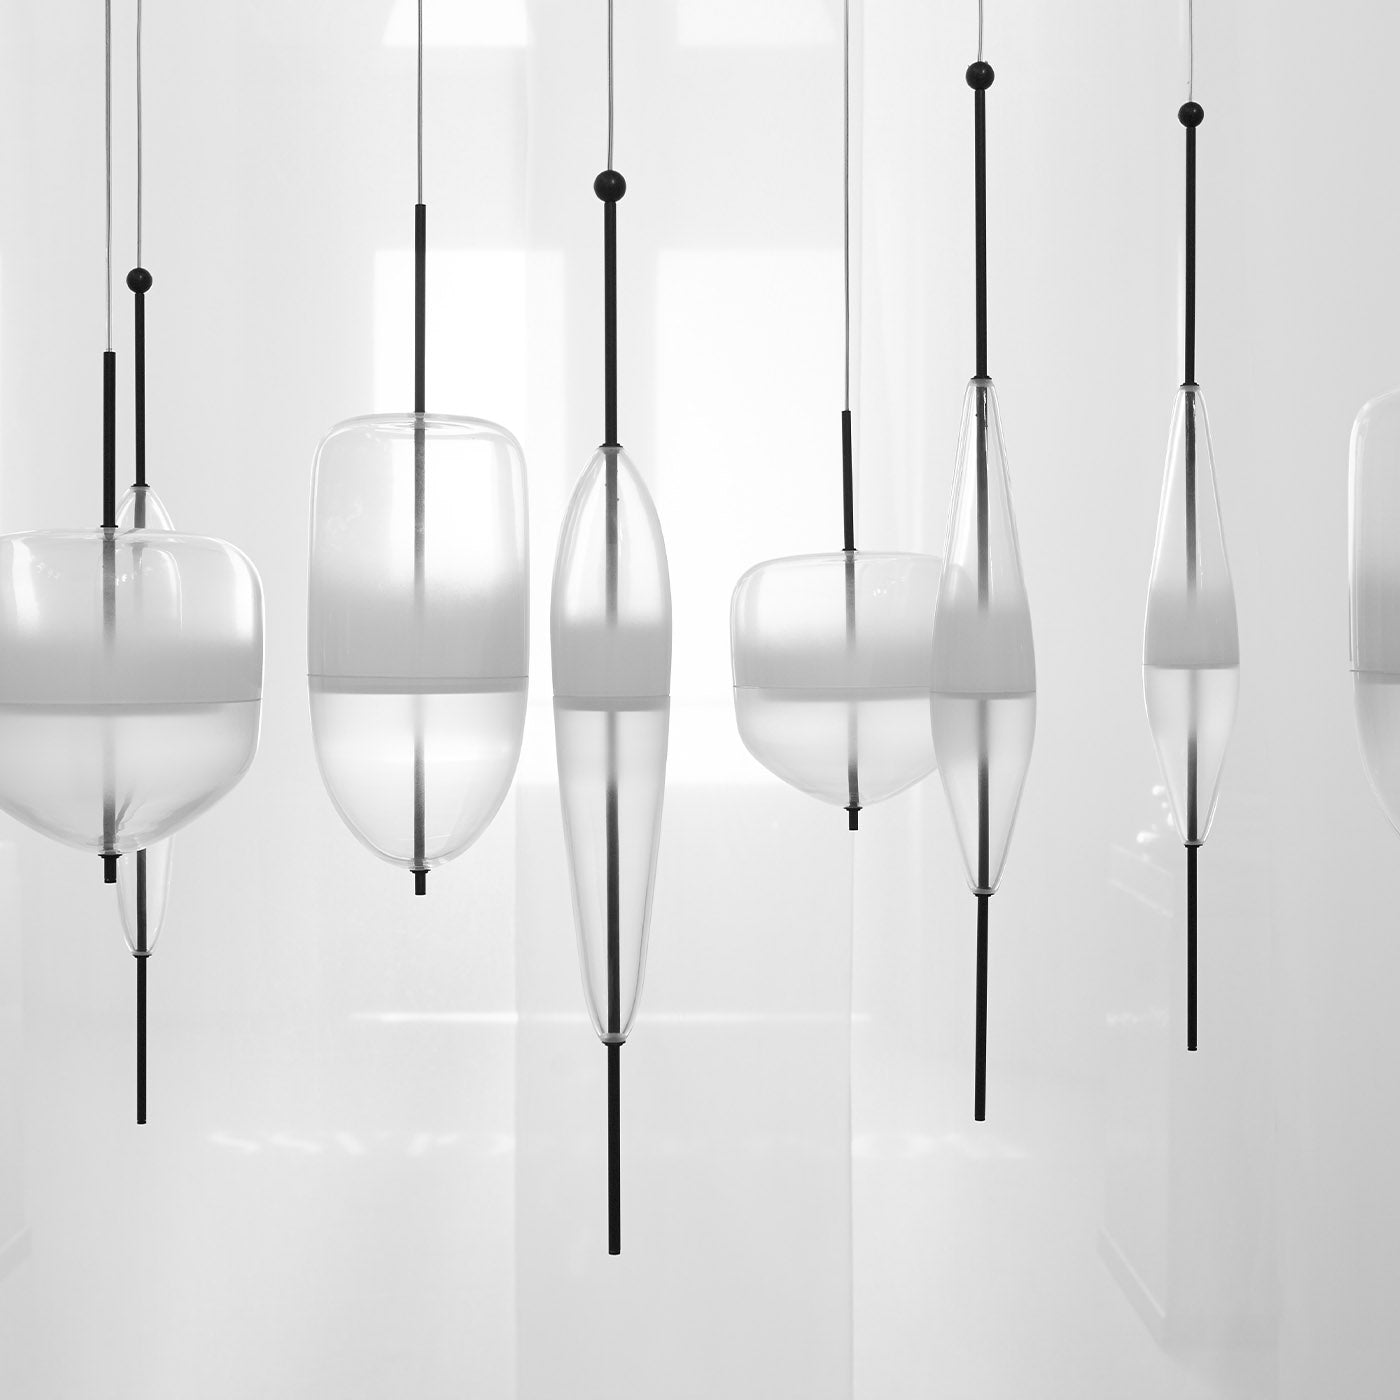 Flow[T] S5 Off White Pendant Lamp by Nao Tamura - Alternative view 1